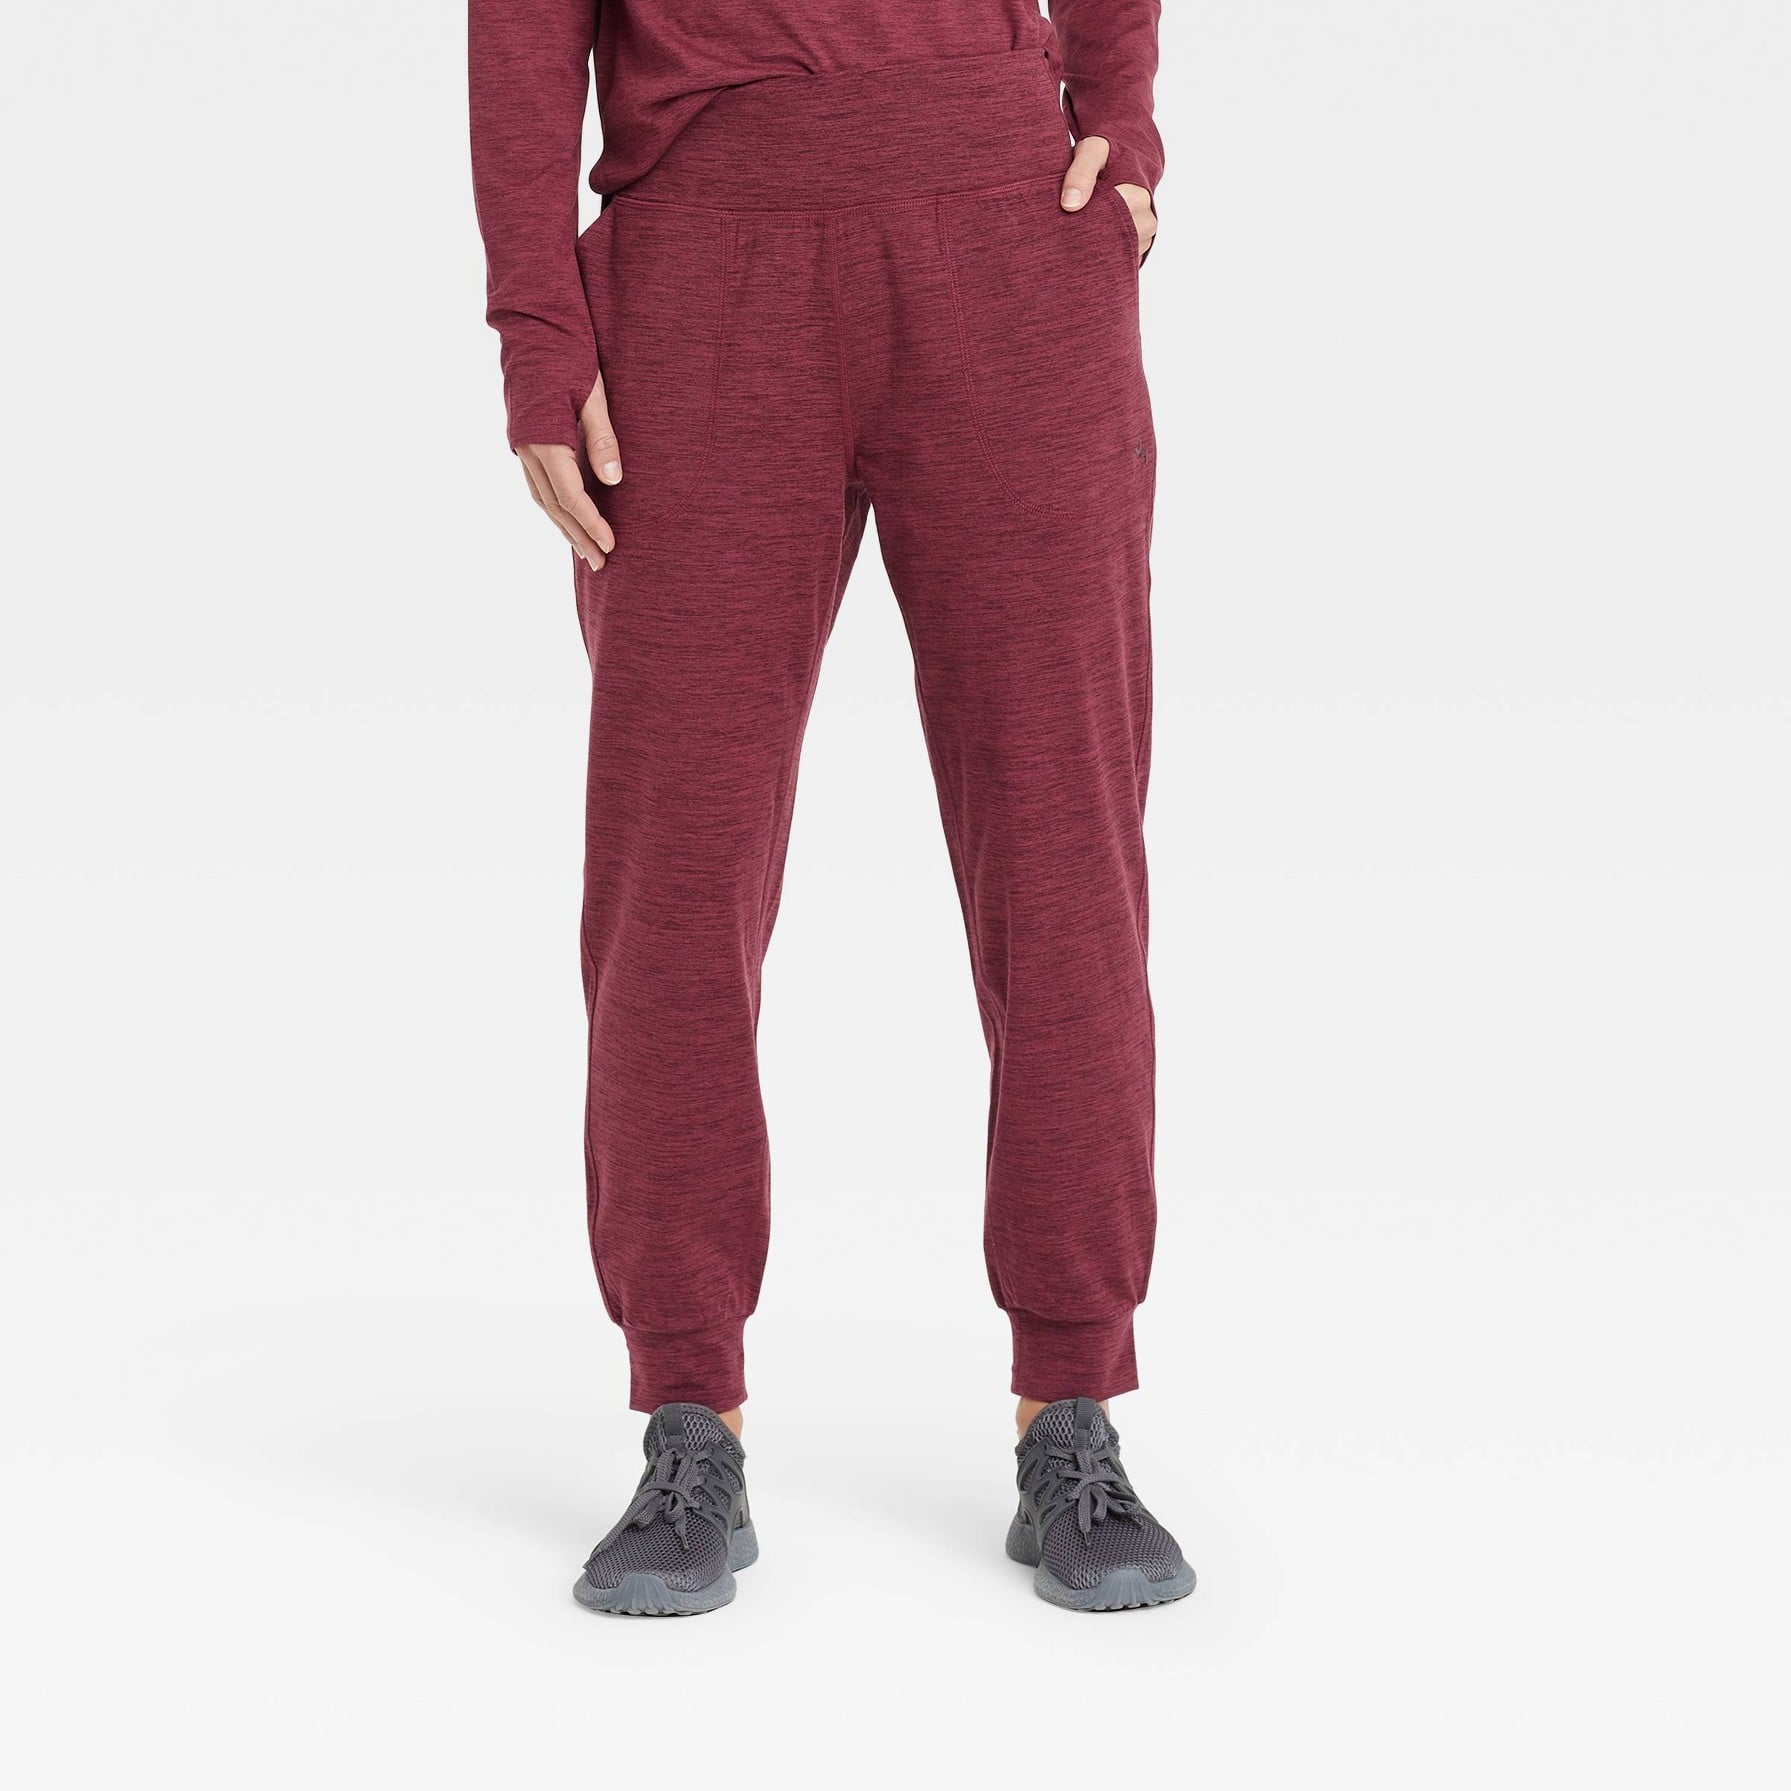 Something Cosy: JoyLab Women's Mid-Rise Cosy Spacedye Jogger Pants, Shop  Our Best Picks From Target's Top-Deals Section